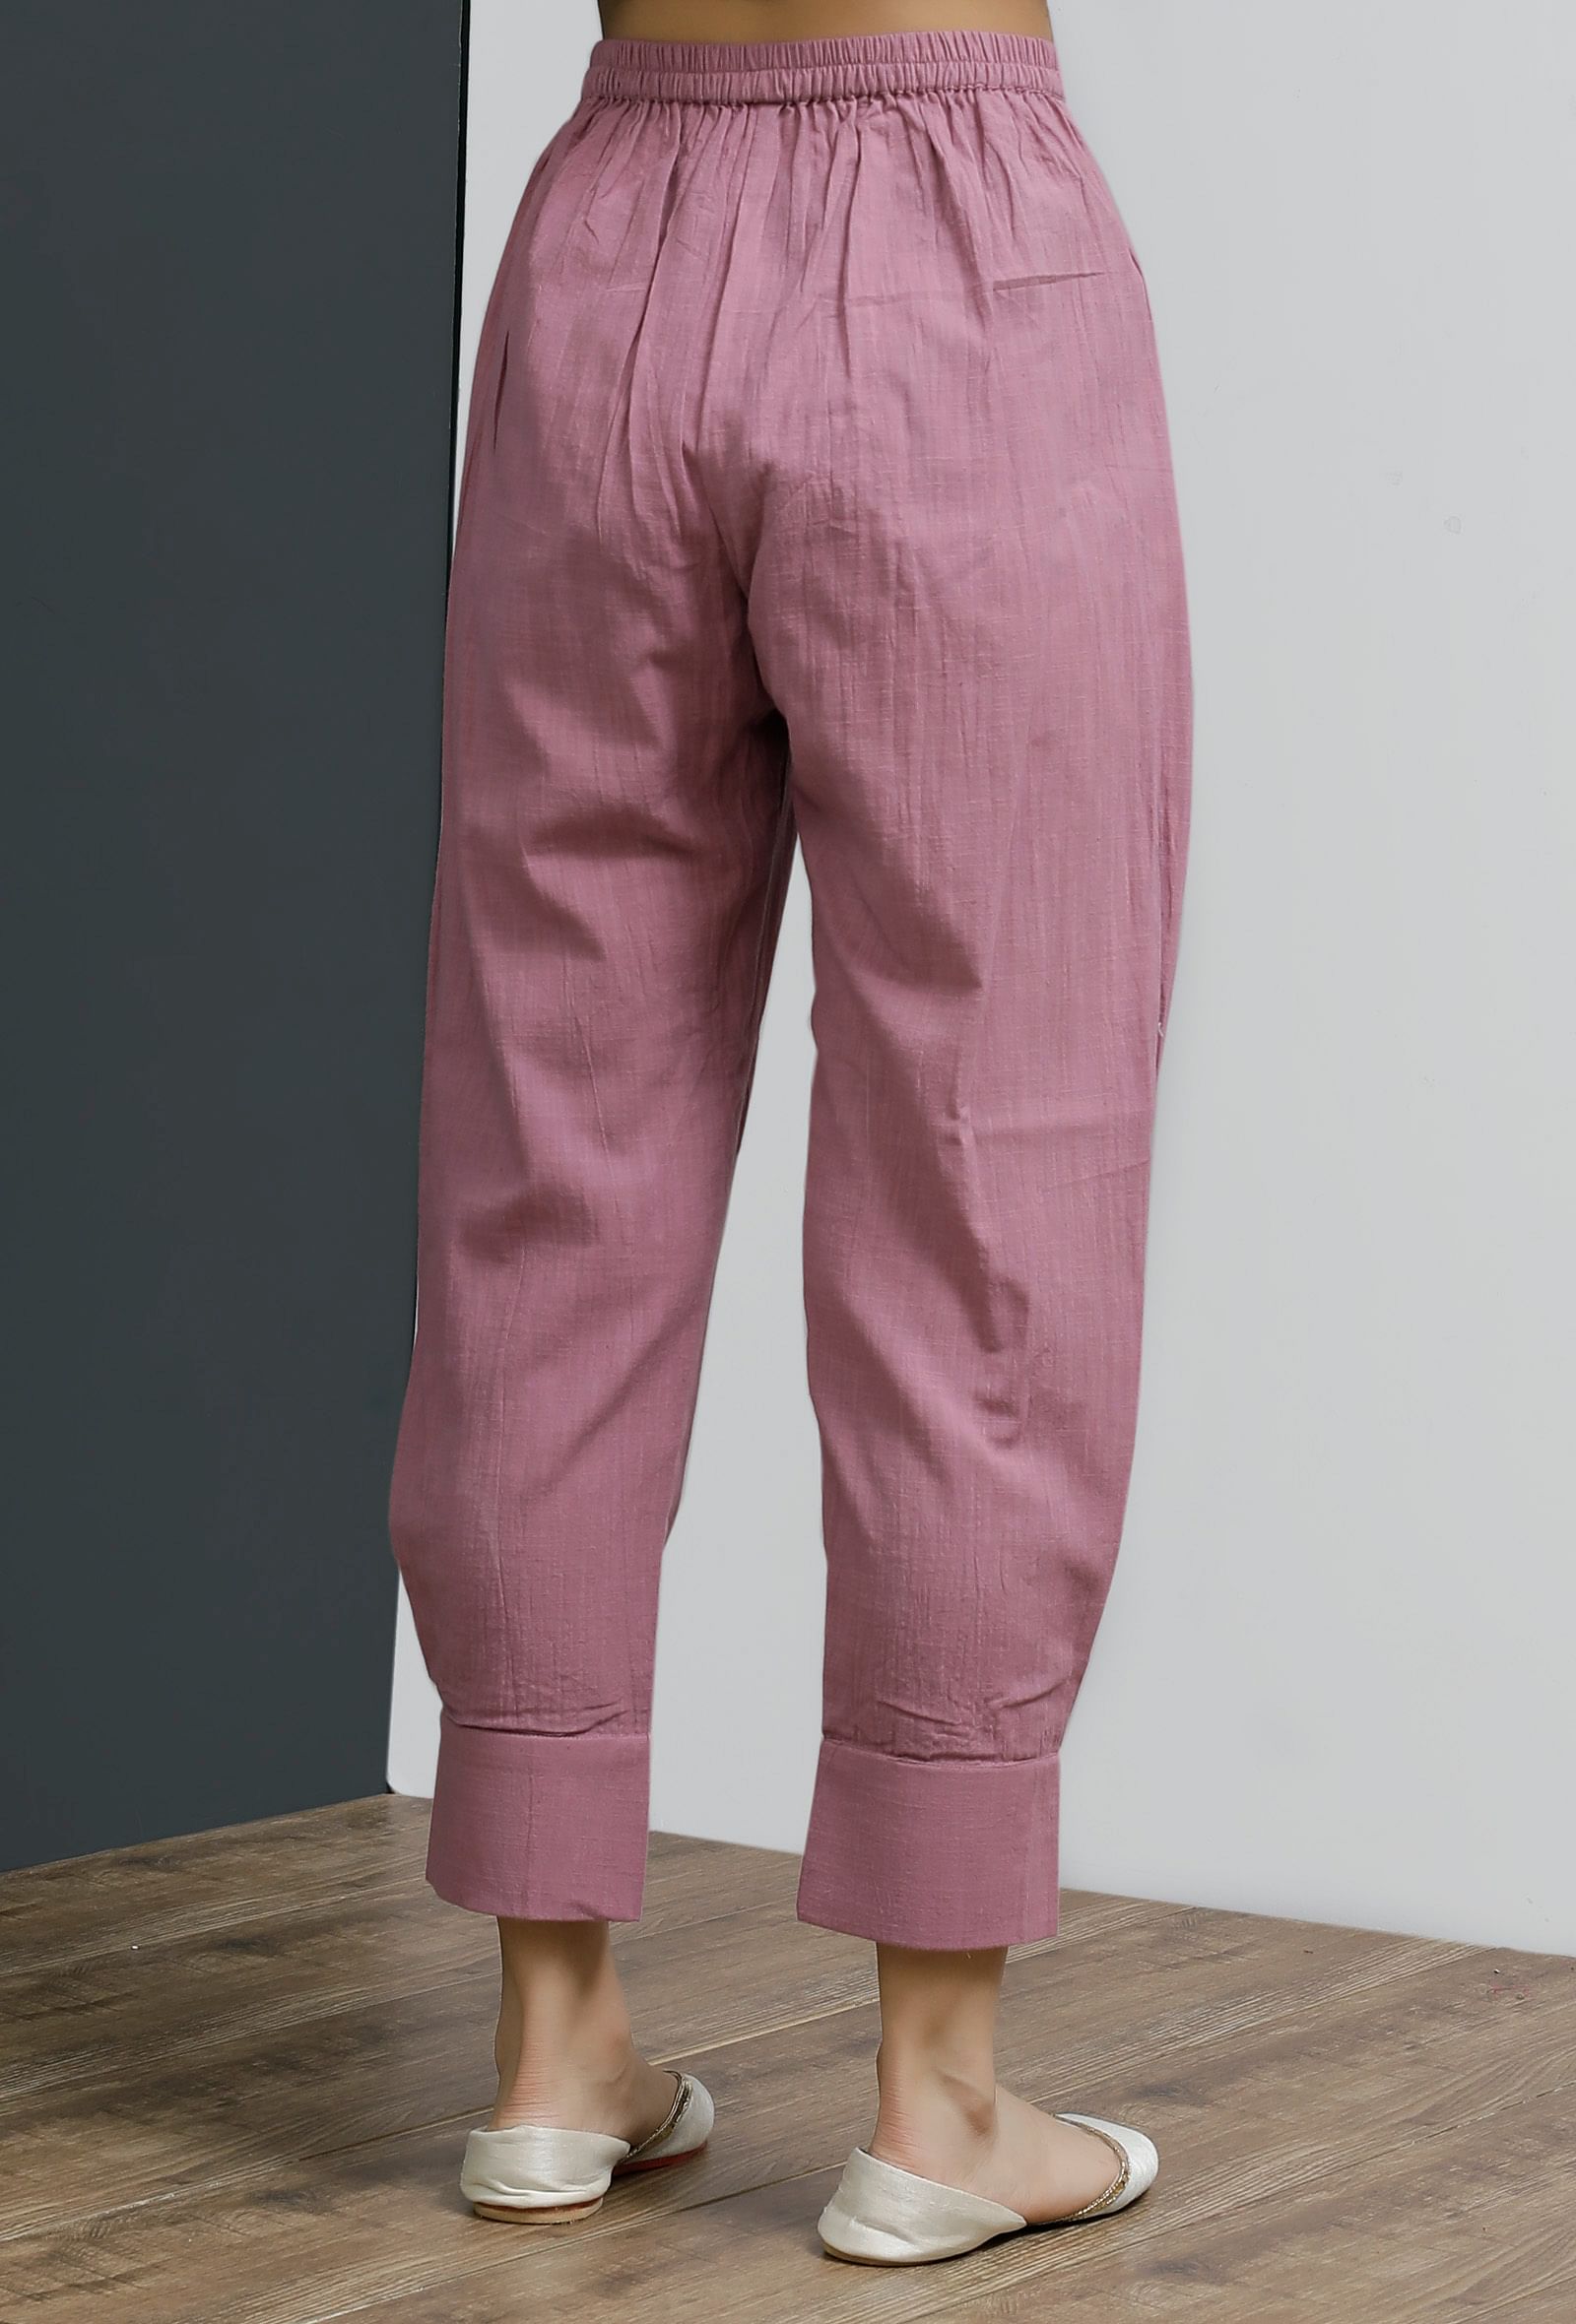 Solid Onion Pink Side Pleated Pants